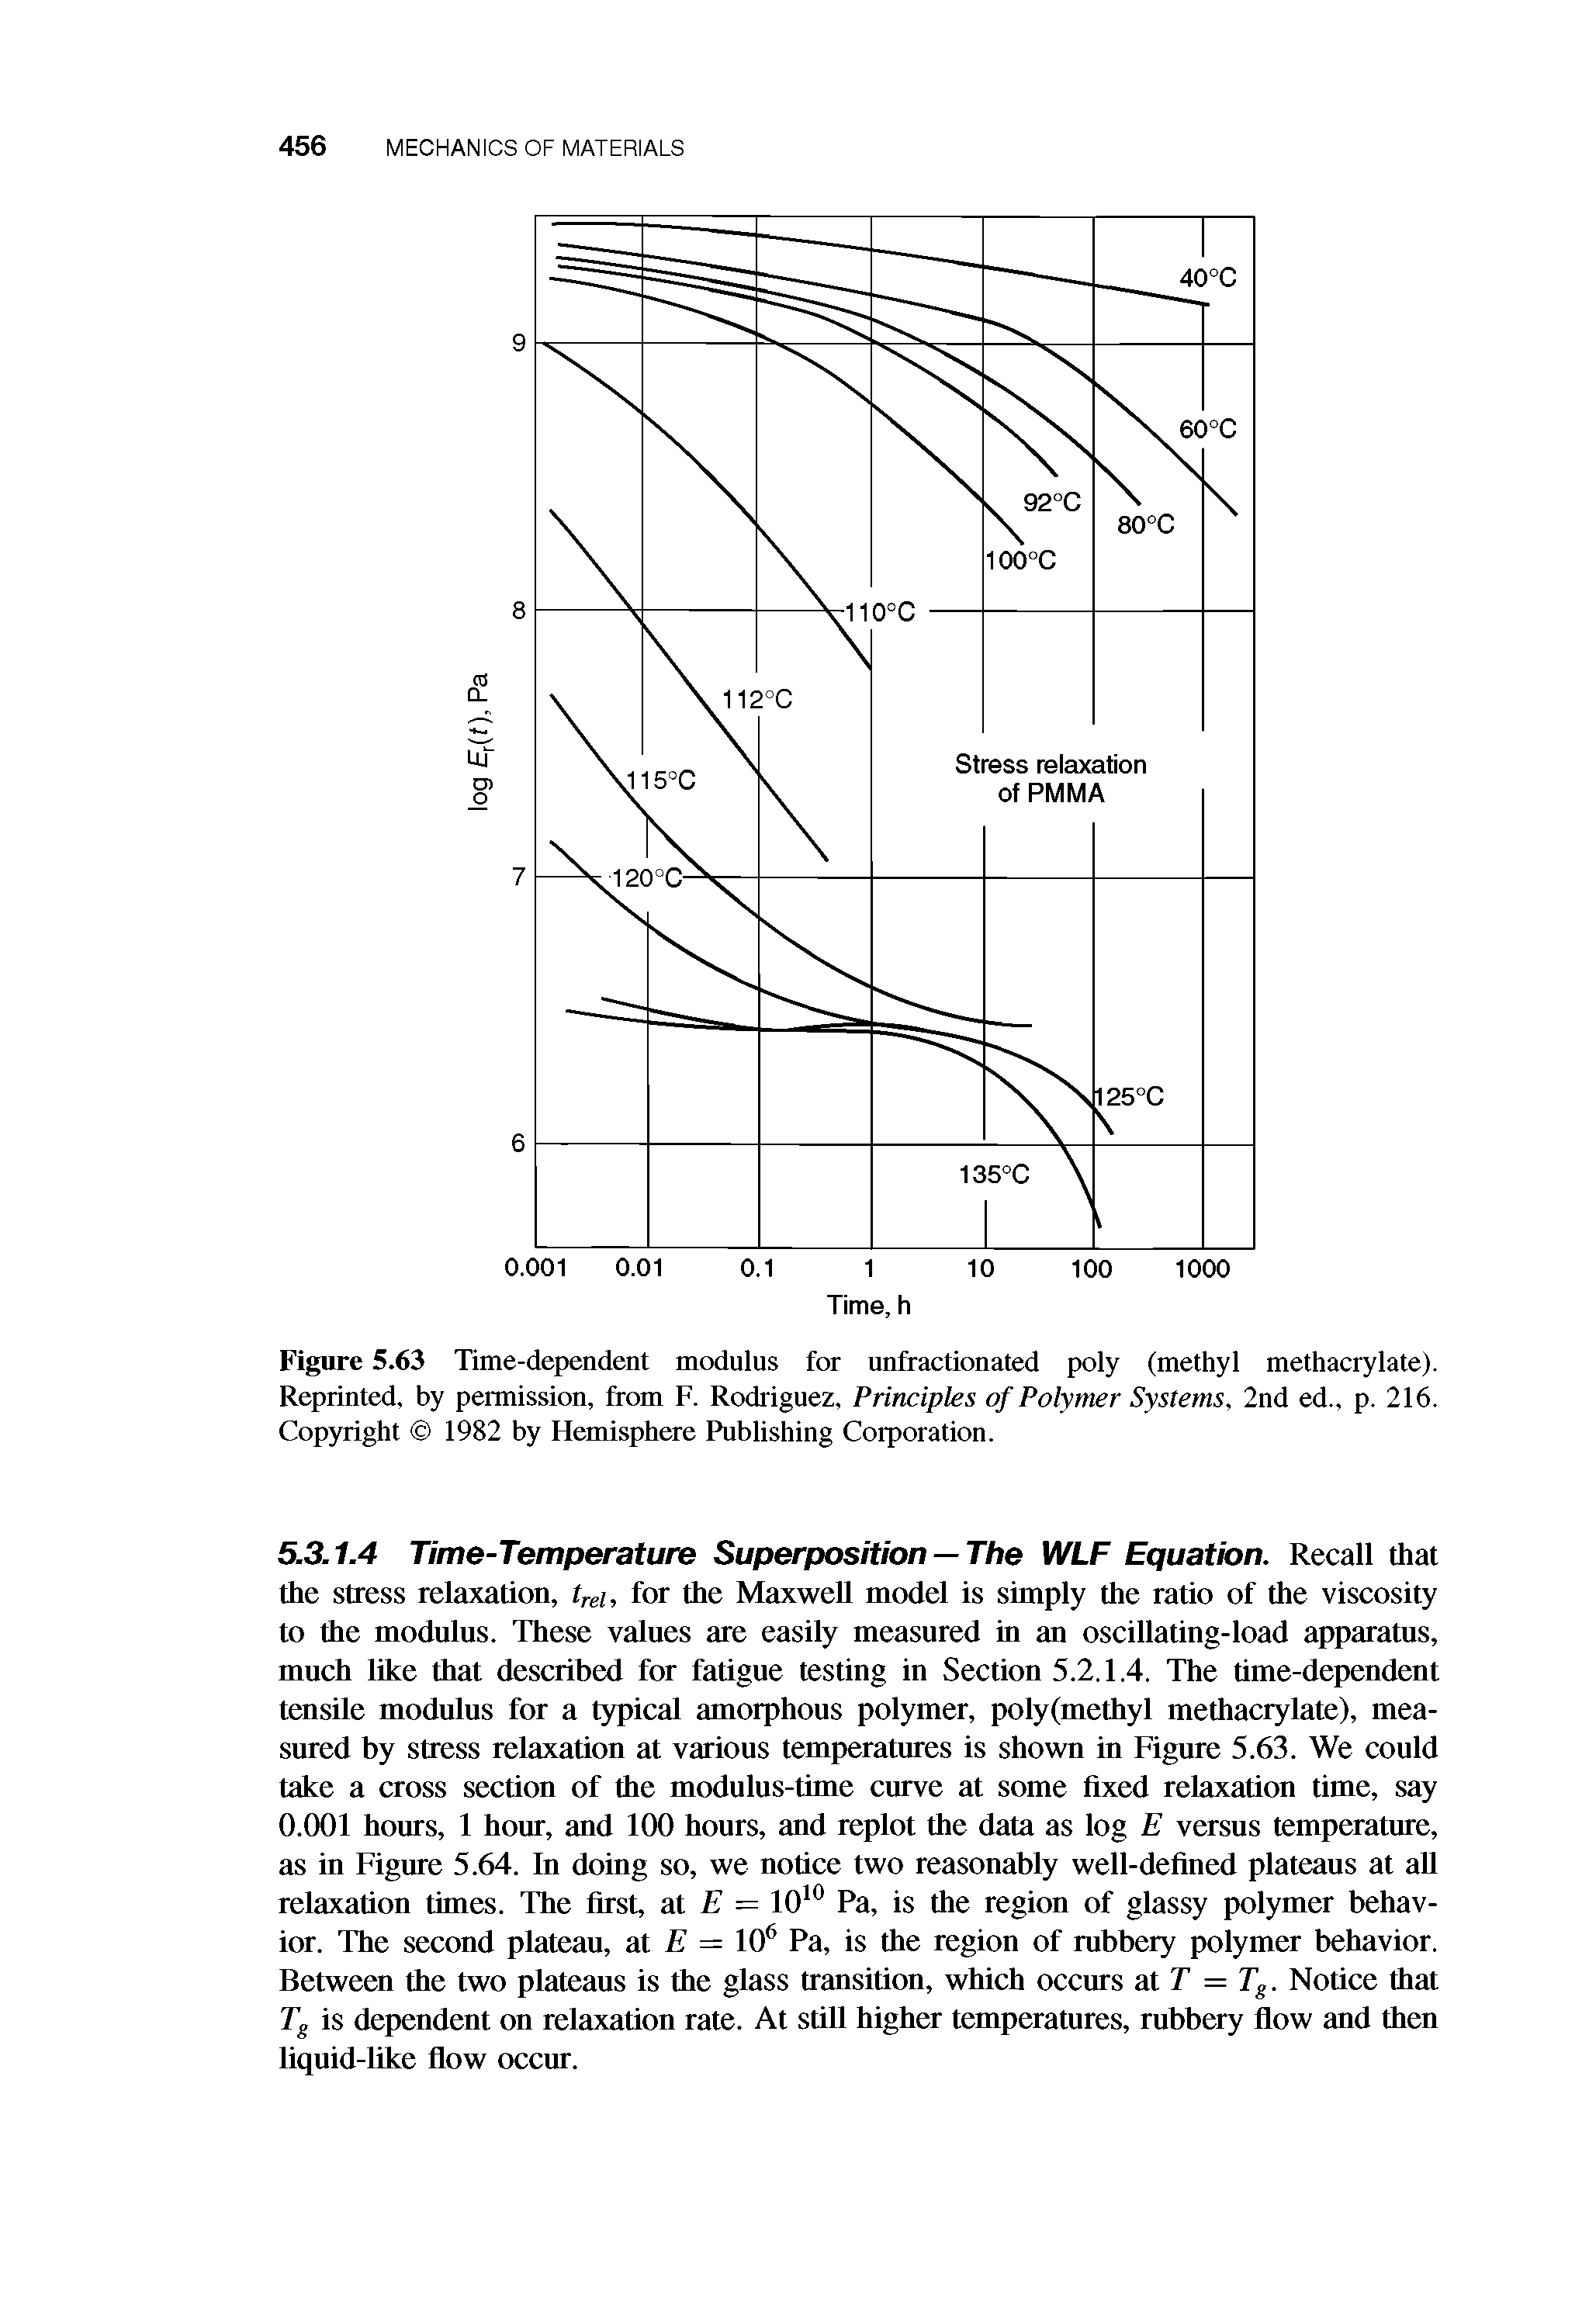 Figure 5.63 Time-dependent modulus for unfractionated poly (methyl methacrylate). Reprinted, by permission, from F. Rodriguez, Principles of Polymer Systems, 2nd ed., p. 216. Copyright 1982 by Hemisphere Publishing Corporation.